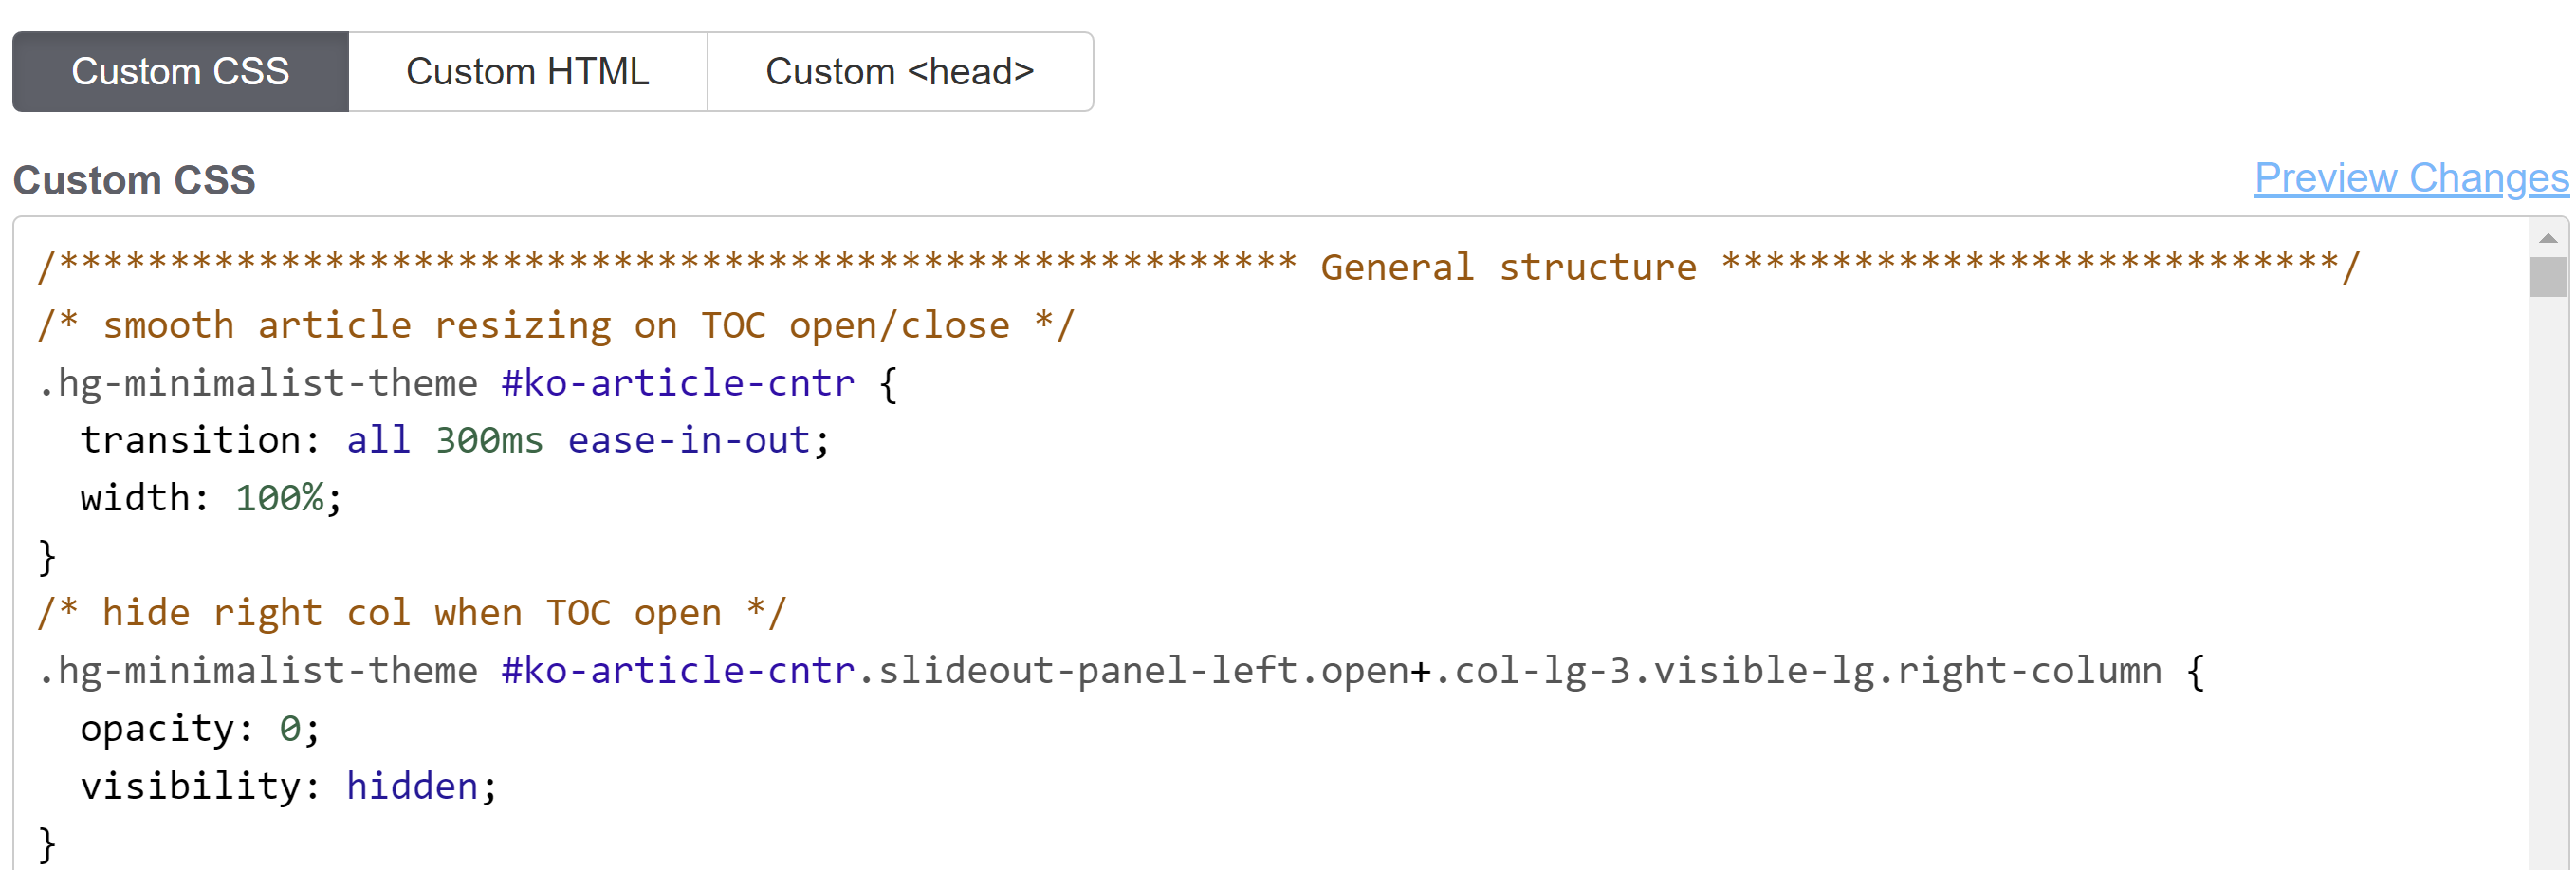 The Custom CSS section of the Style Settings page. The section displays a long comment with 